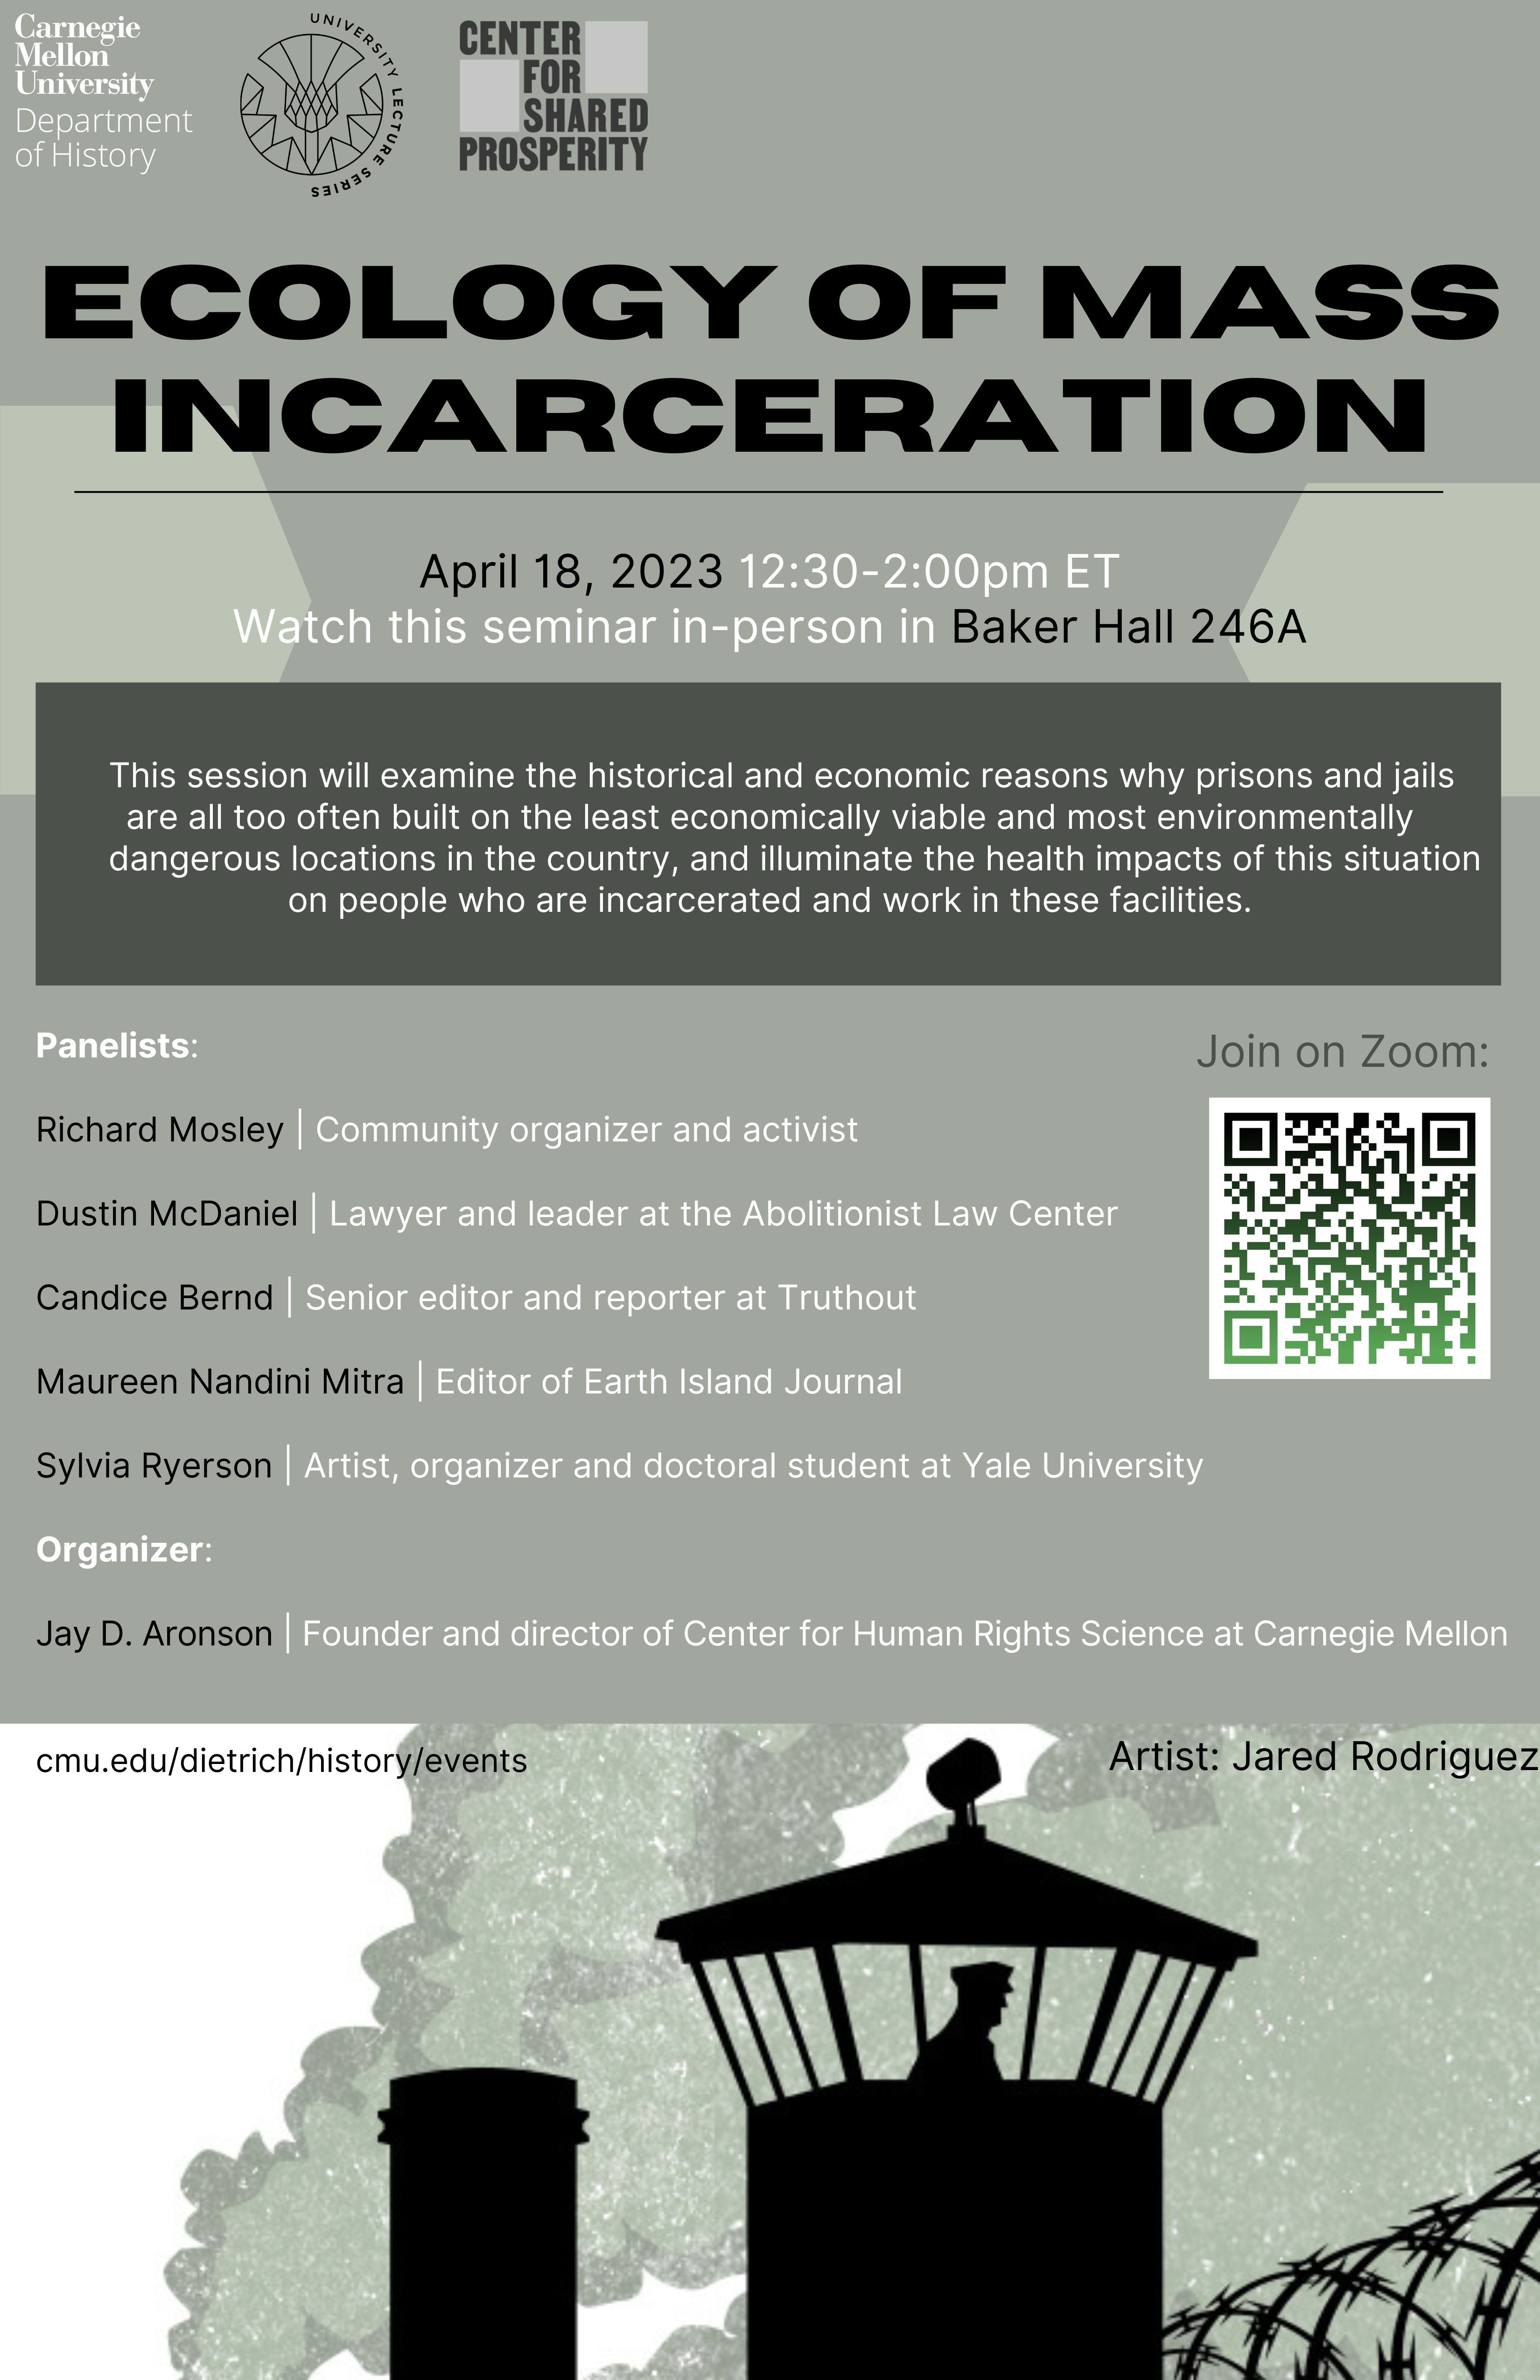 Ecology of Mass Incarceration - Department of History - Dietrich